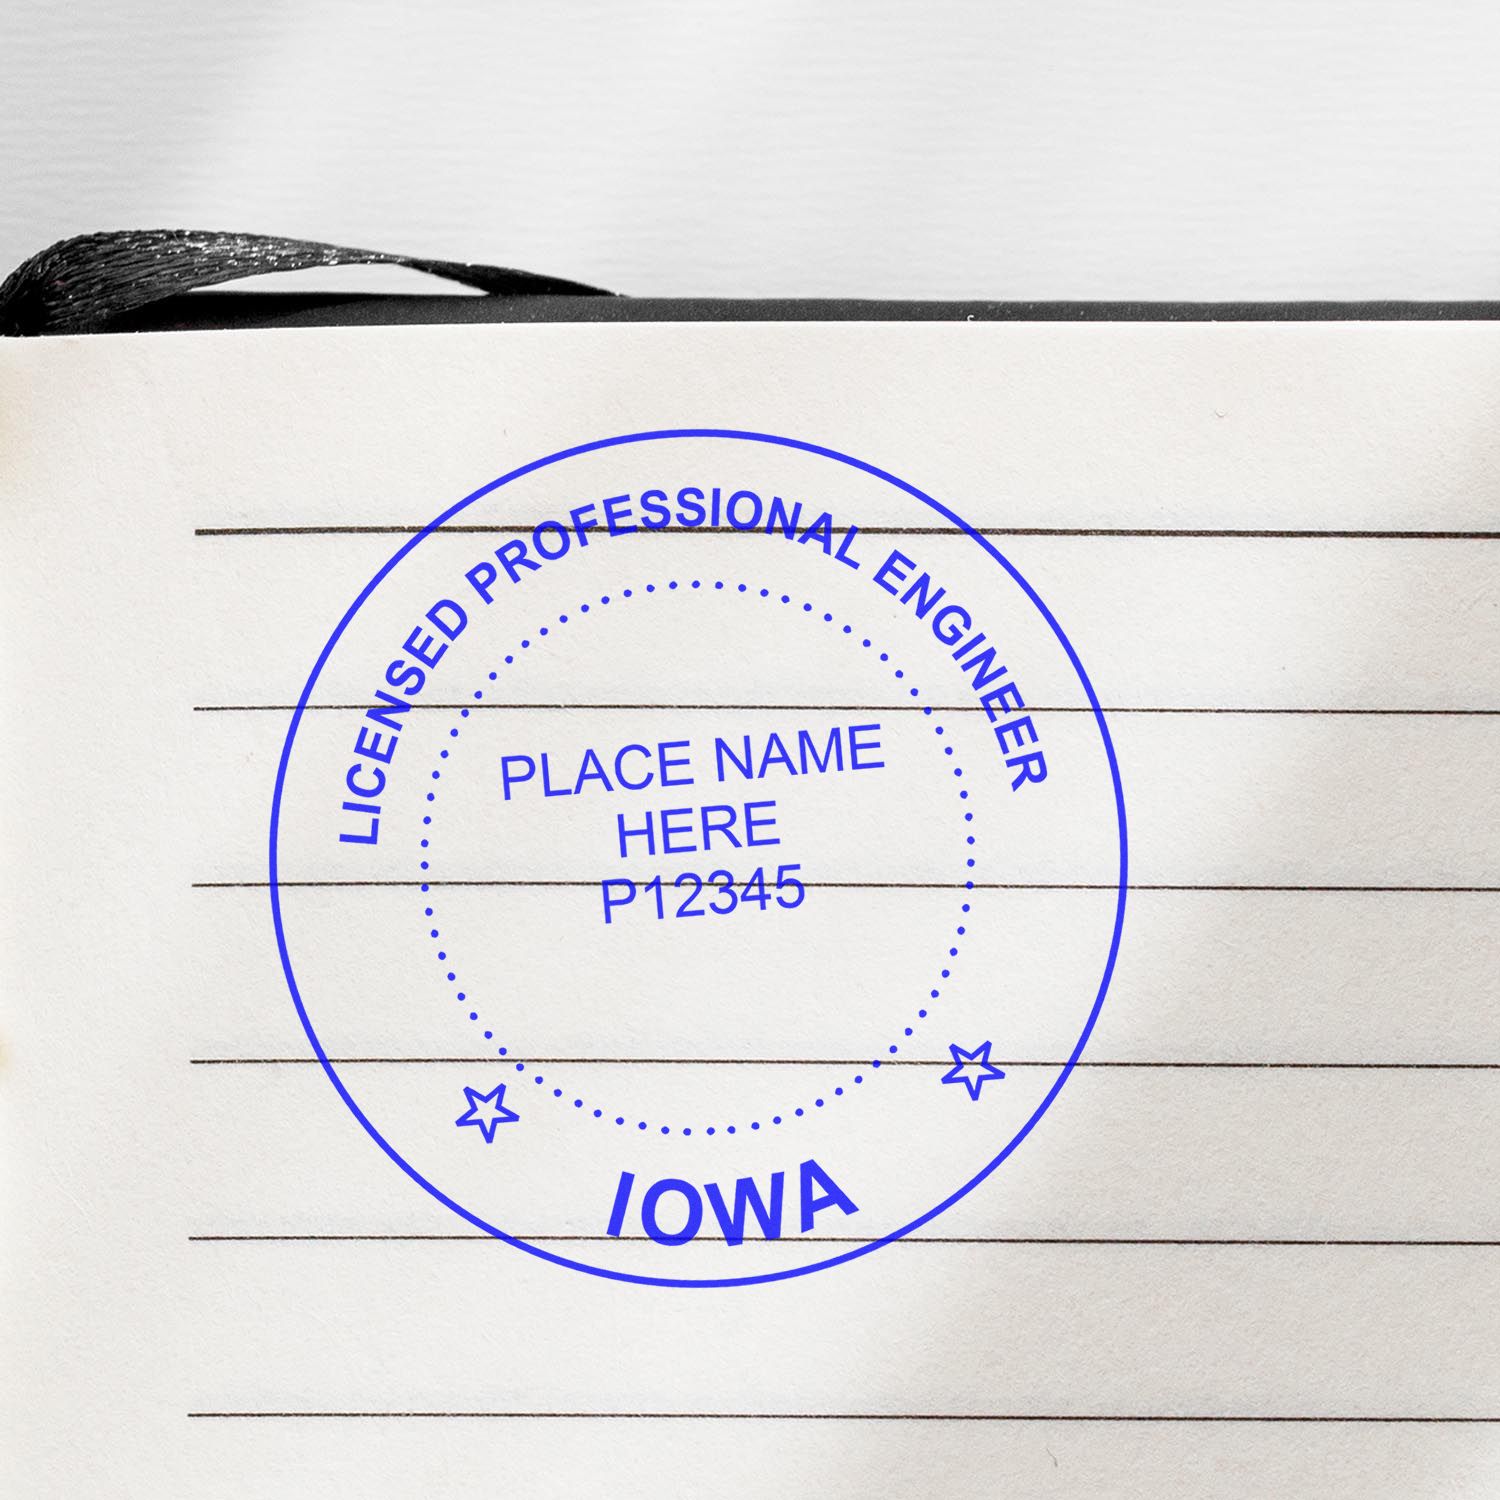 The Self-Inking Iowa PE Stamp stamp impression comes to life with a crisp, detailed photo on paper - showcasing true professional quality.